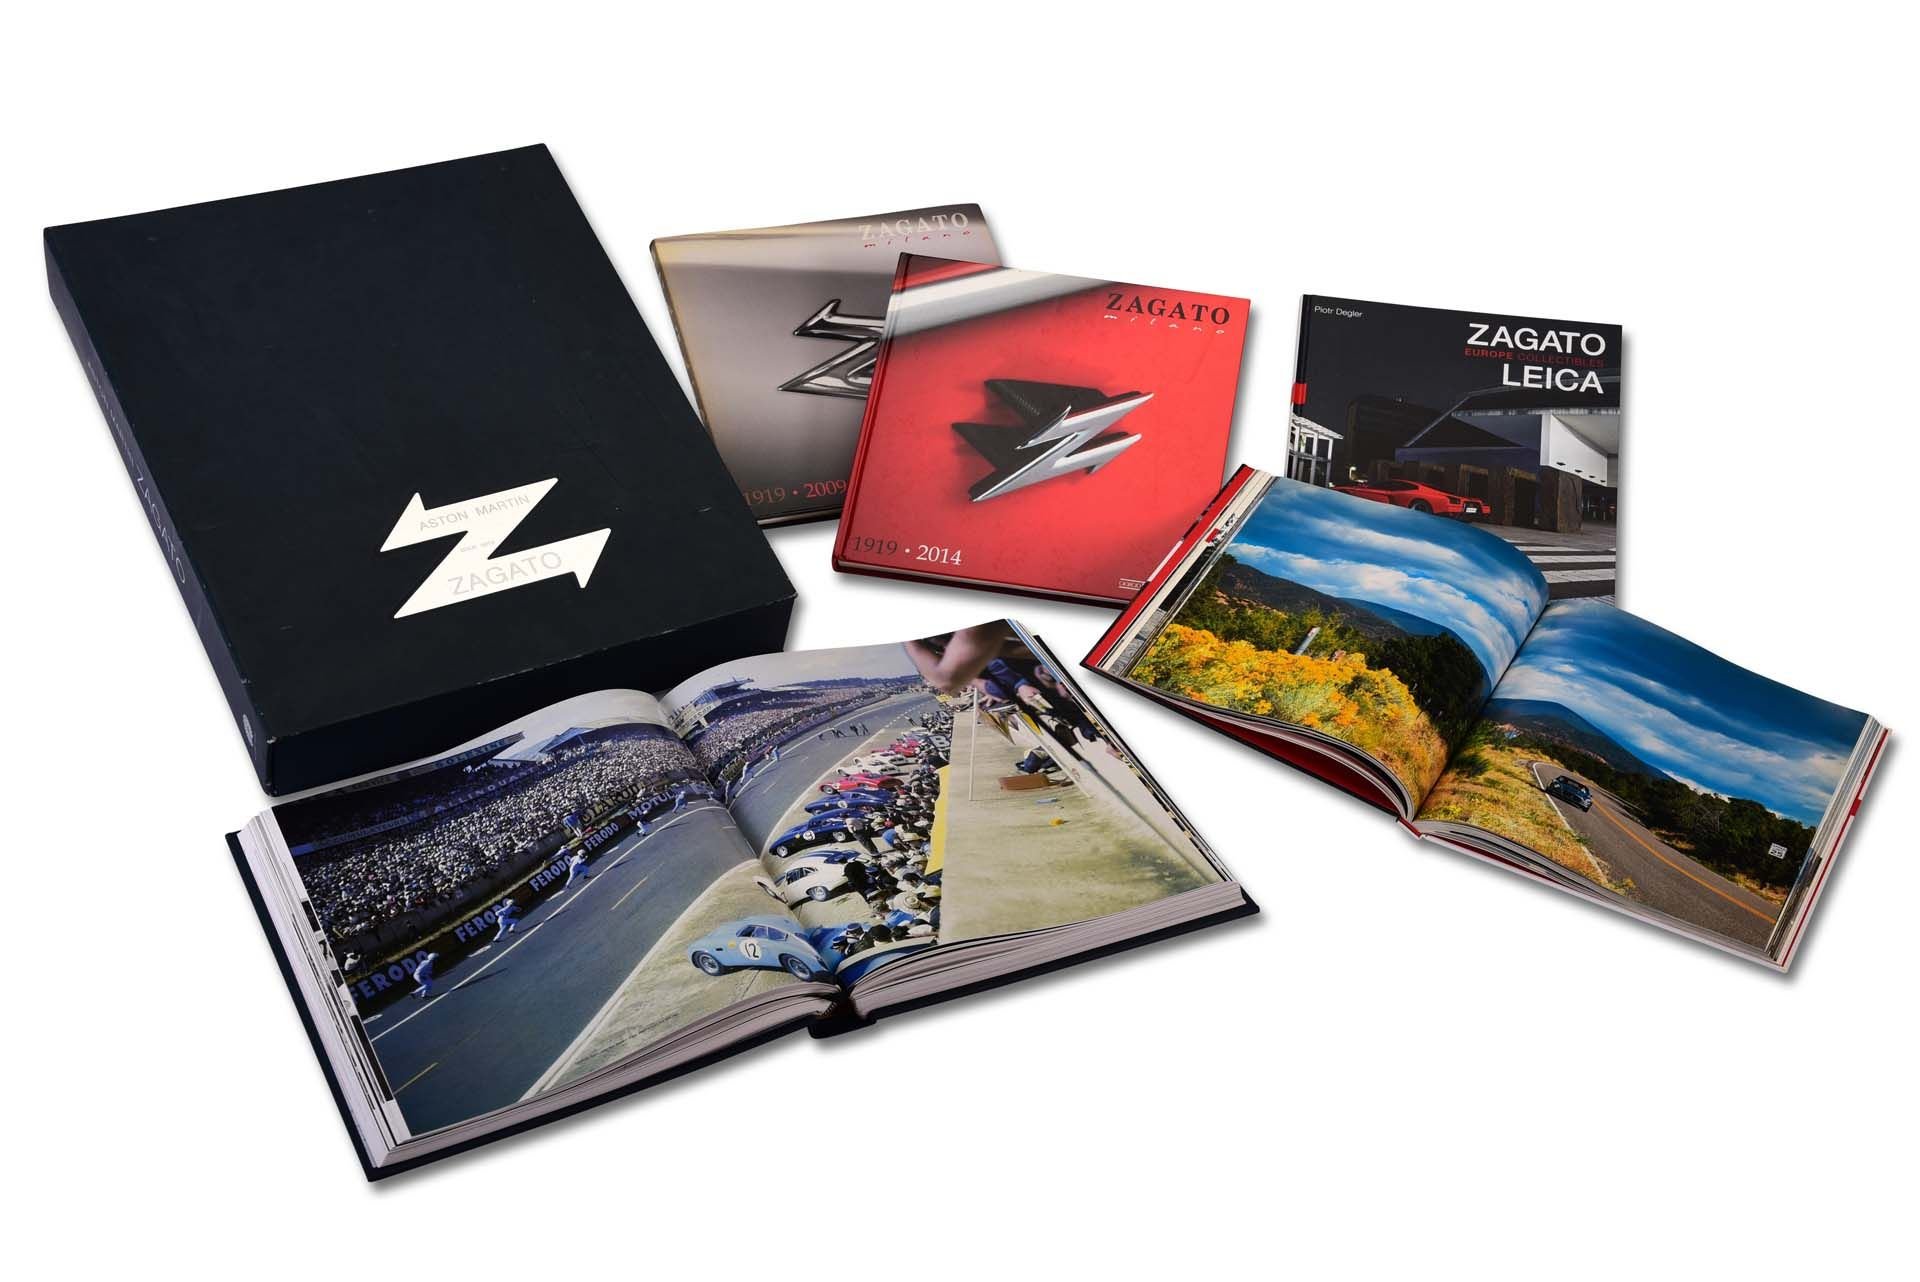 For Sale Lot of Zagato Related Books Highlighted by Stephen Archer's Seminal Work